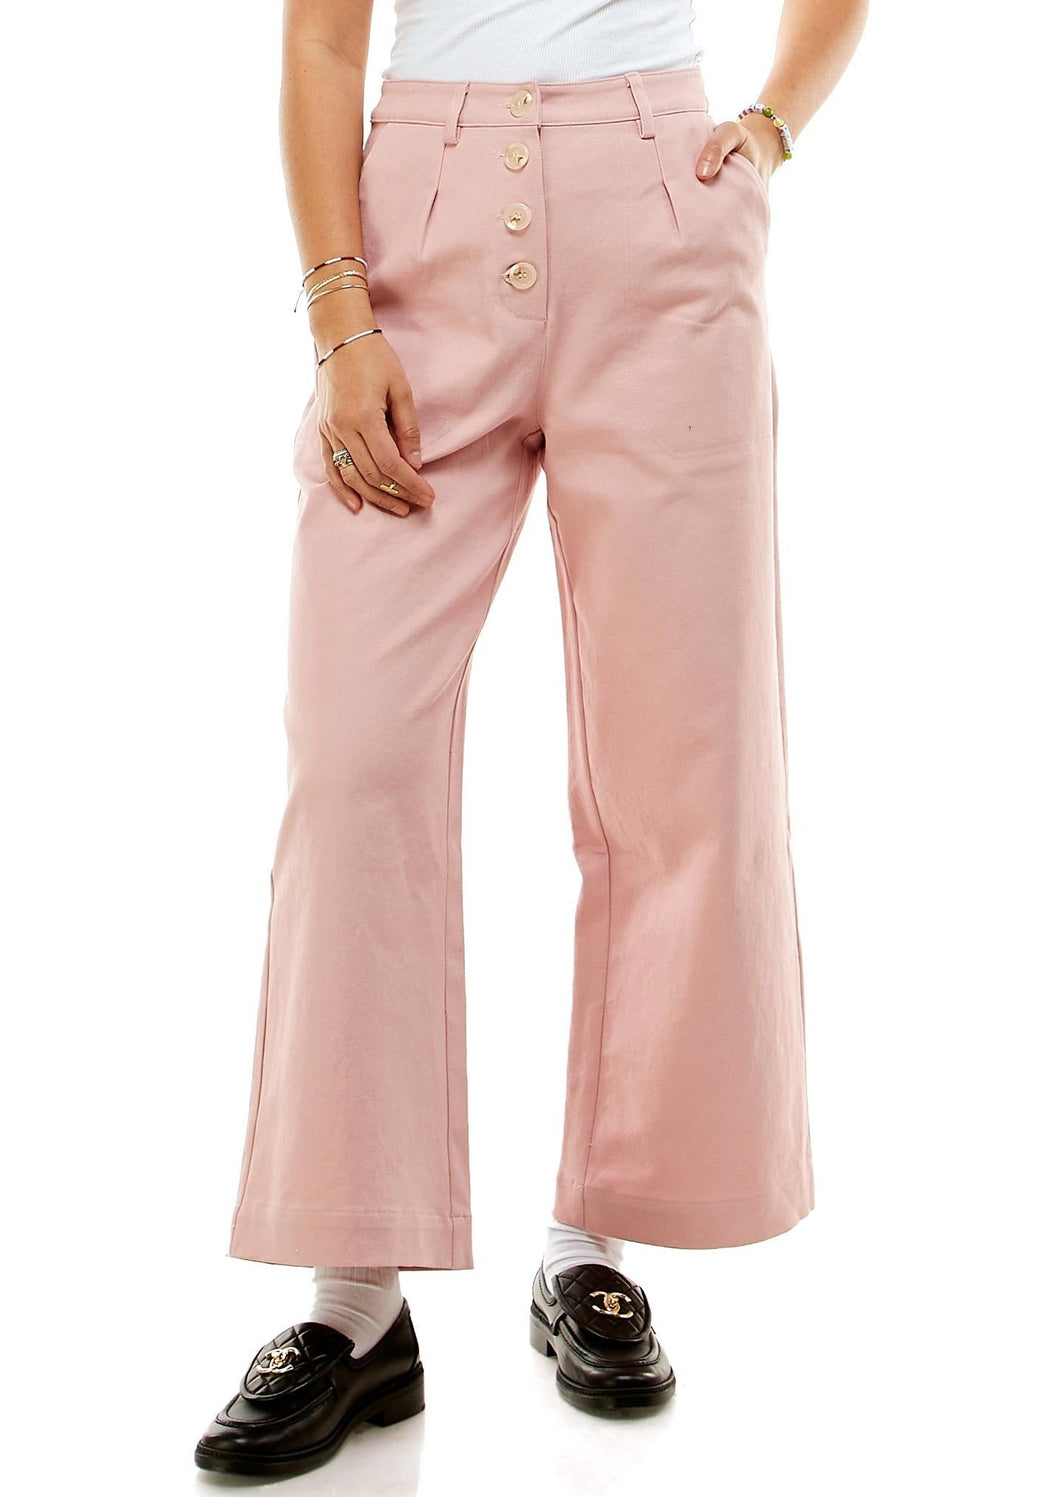 Marshall Twill Pant in Gossamer Pink